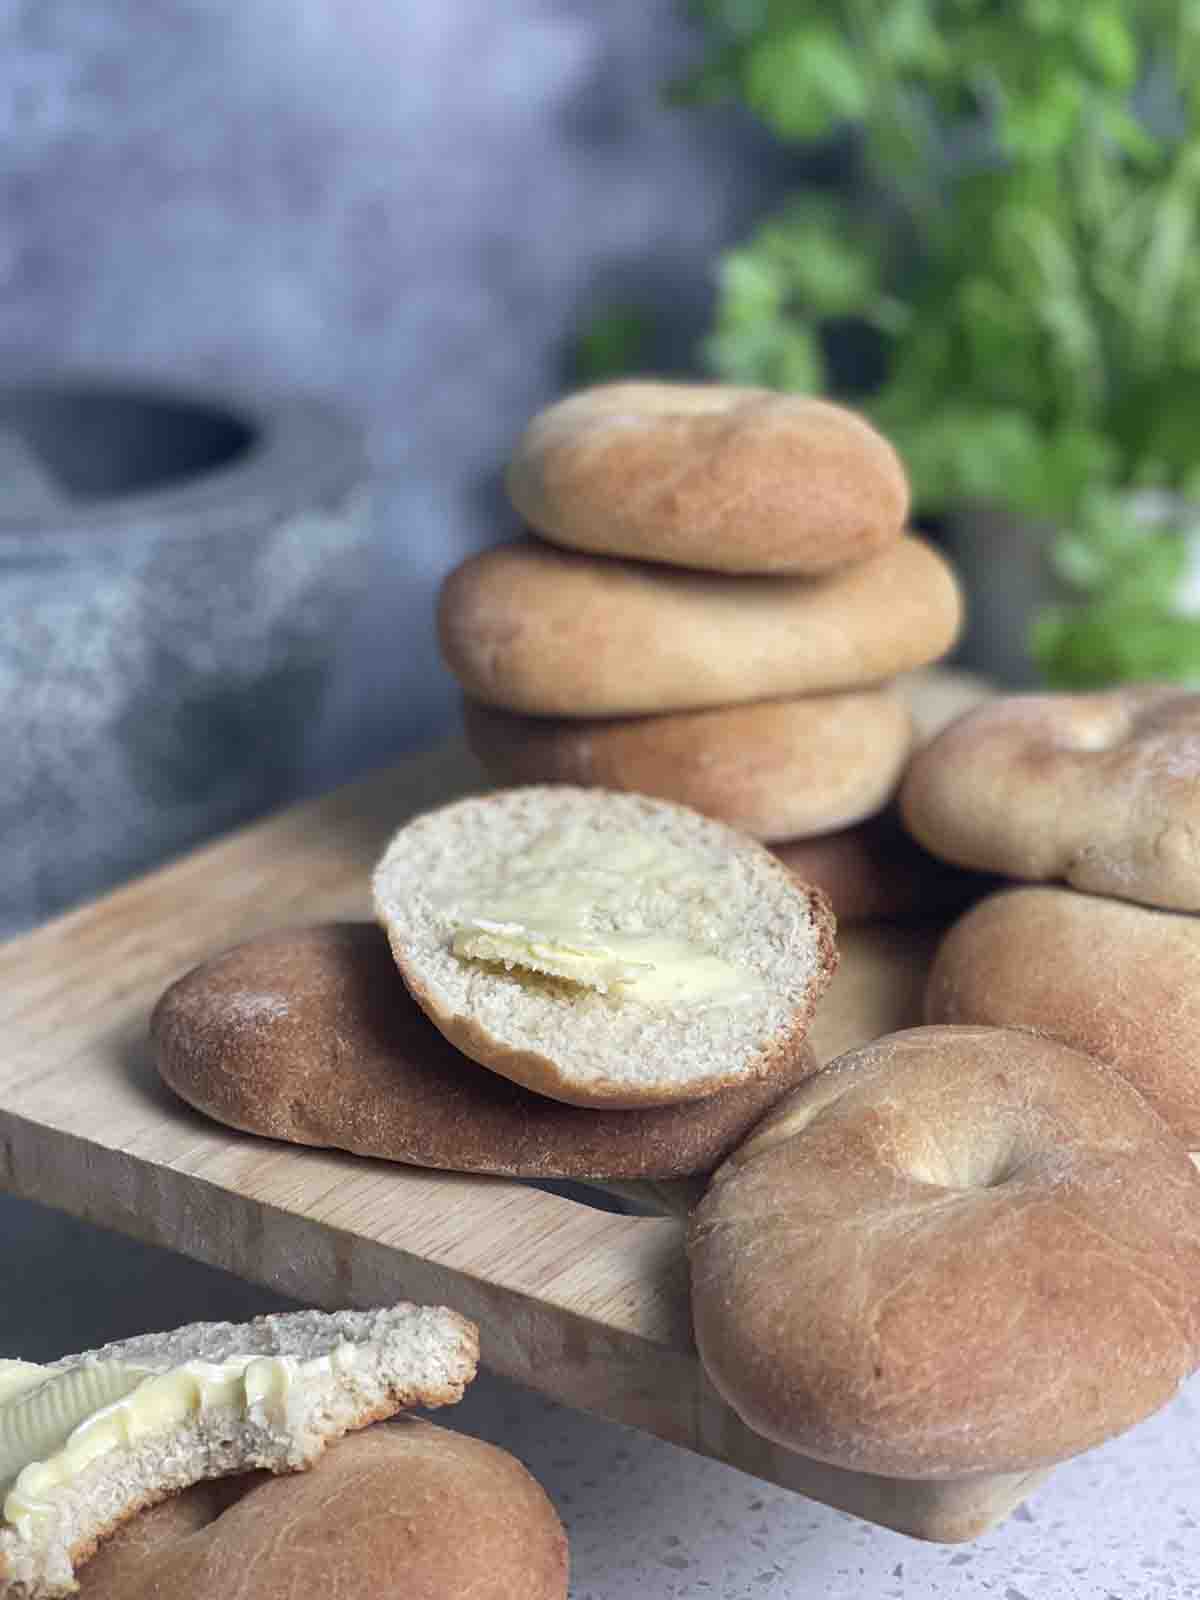 bread rolls in stacks with a sliced roll.